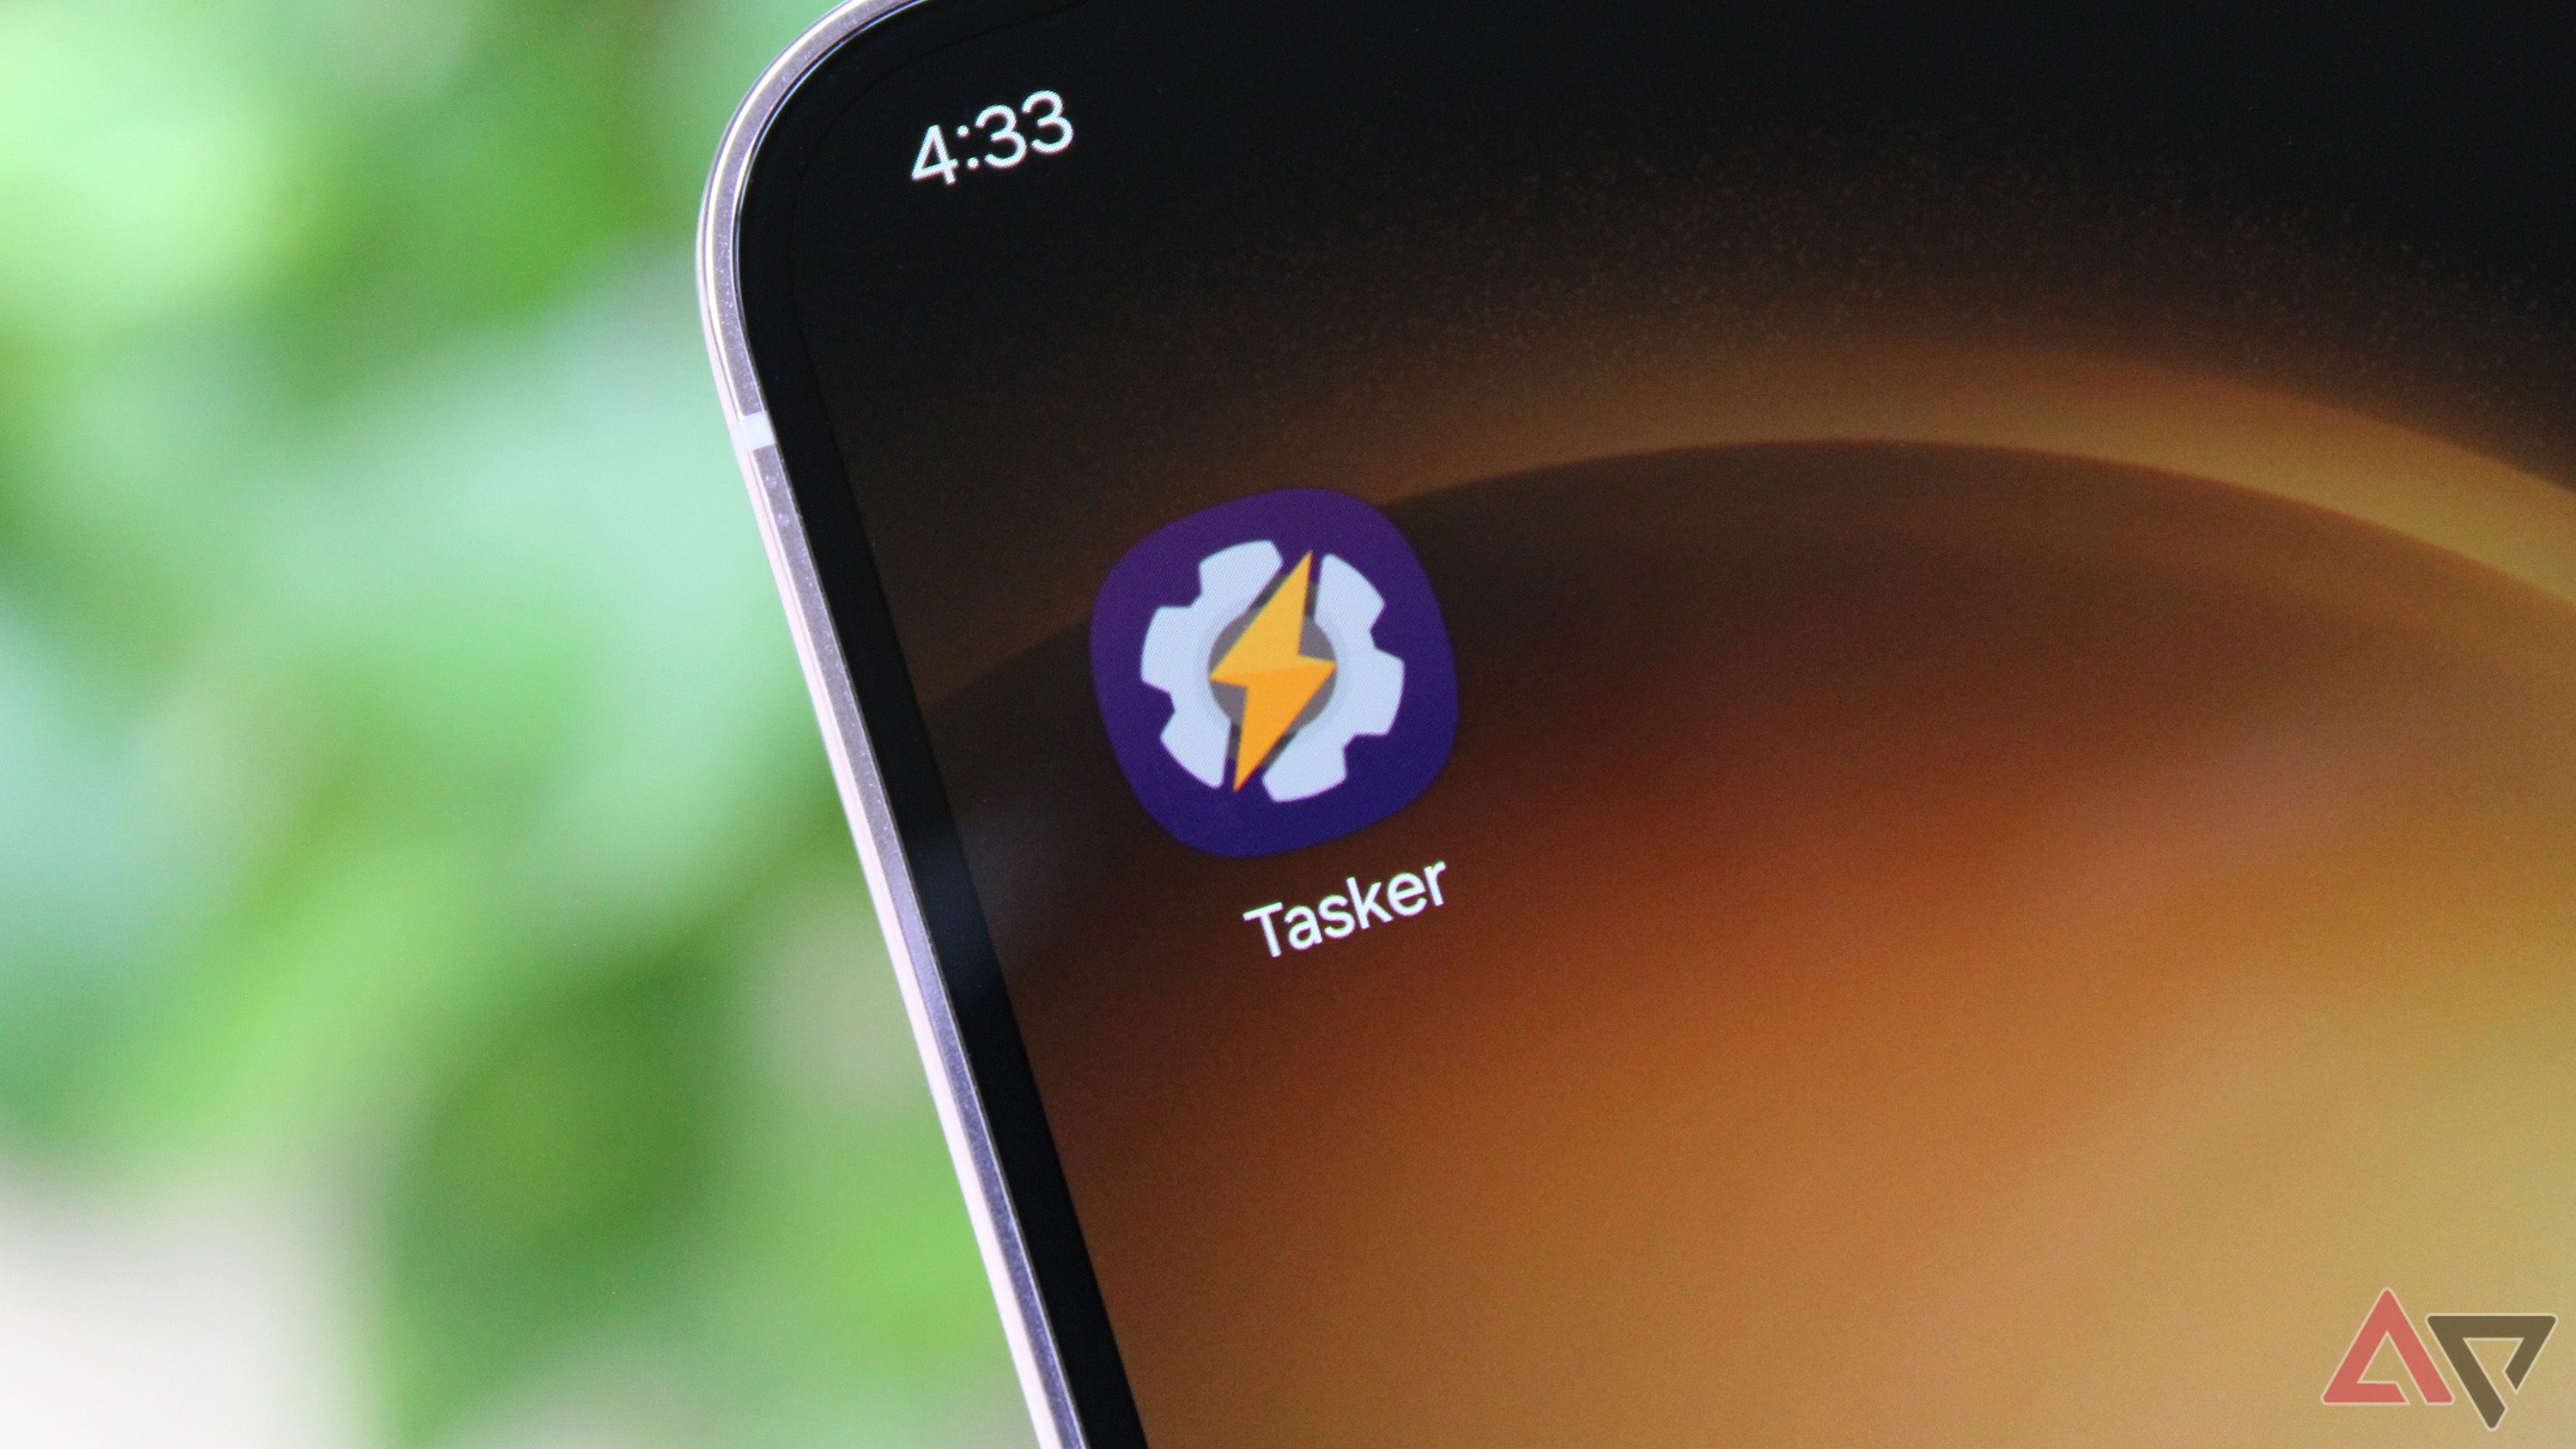 Photo of the Tasker app's icon on a phone's home screen, close-cropped against a green background.